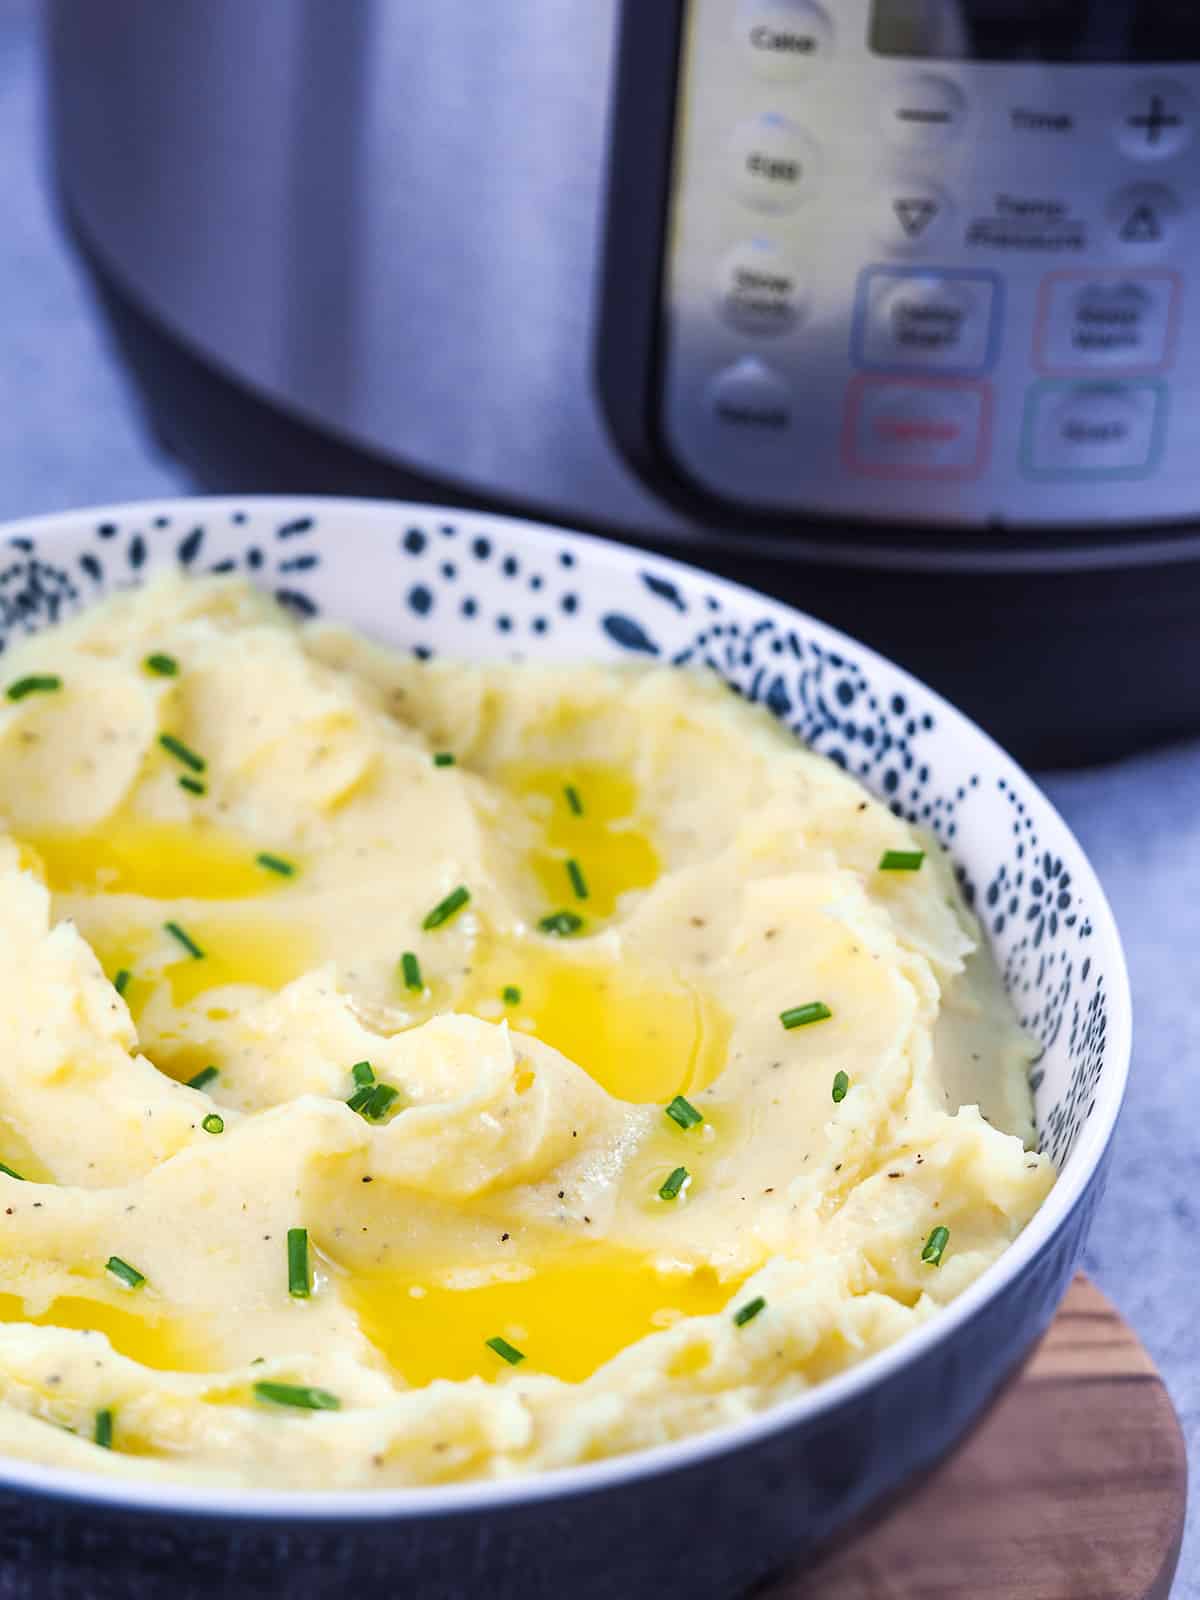 mashed potatoes in blue bowl with chives and butter